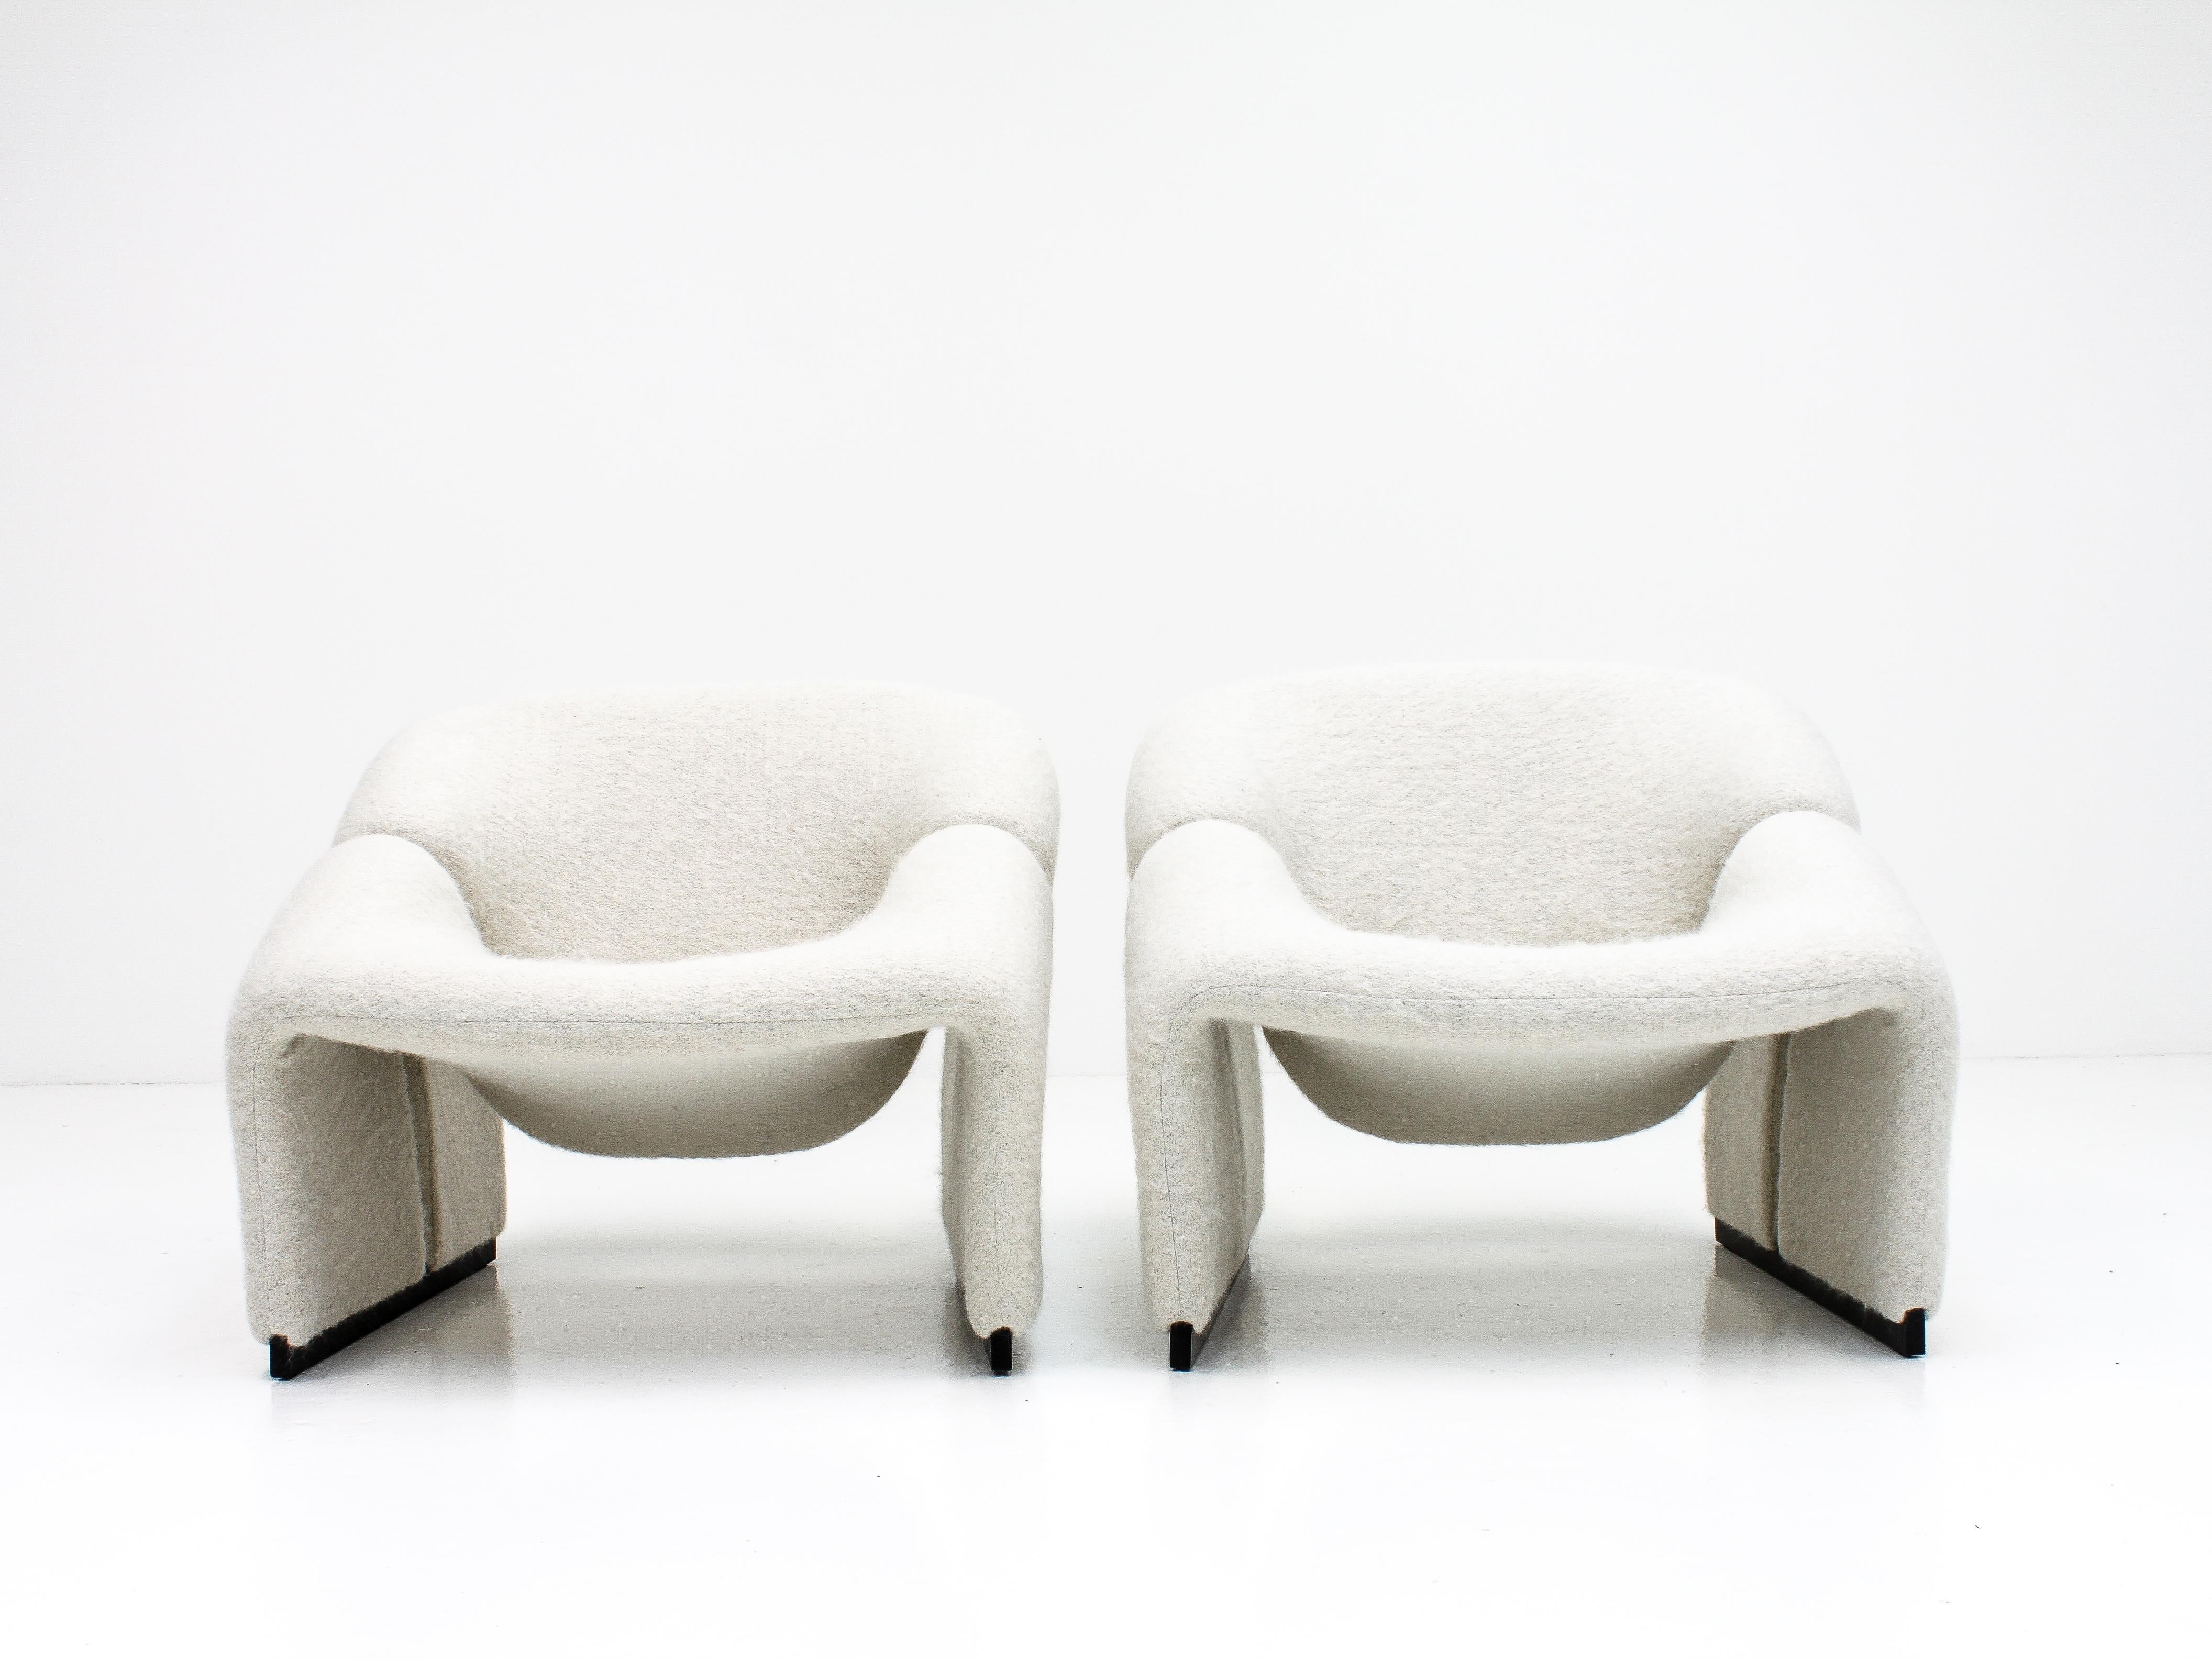 Pair of Pierre Paulin F580 1st Edition Groovy Chairs in Pierre Frey for Artifort 3